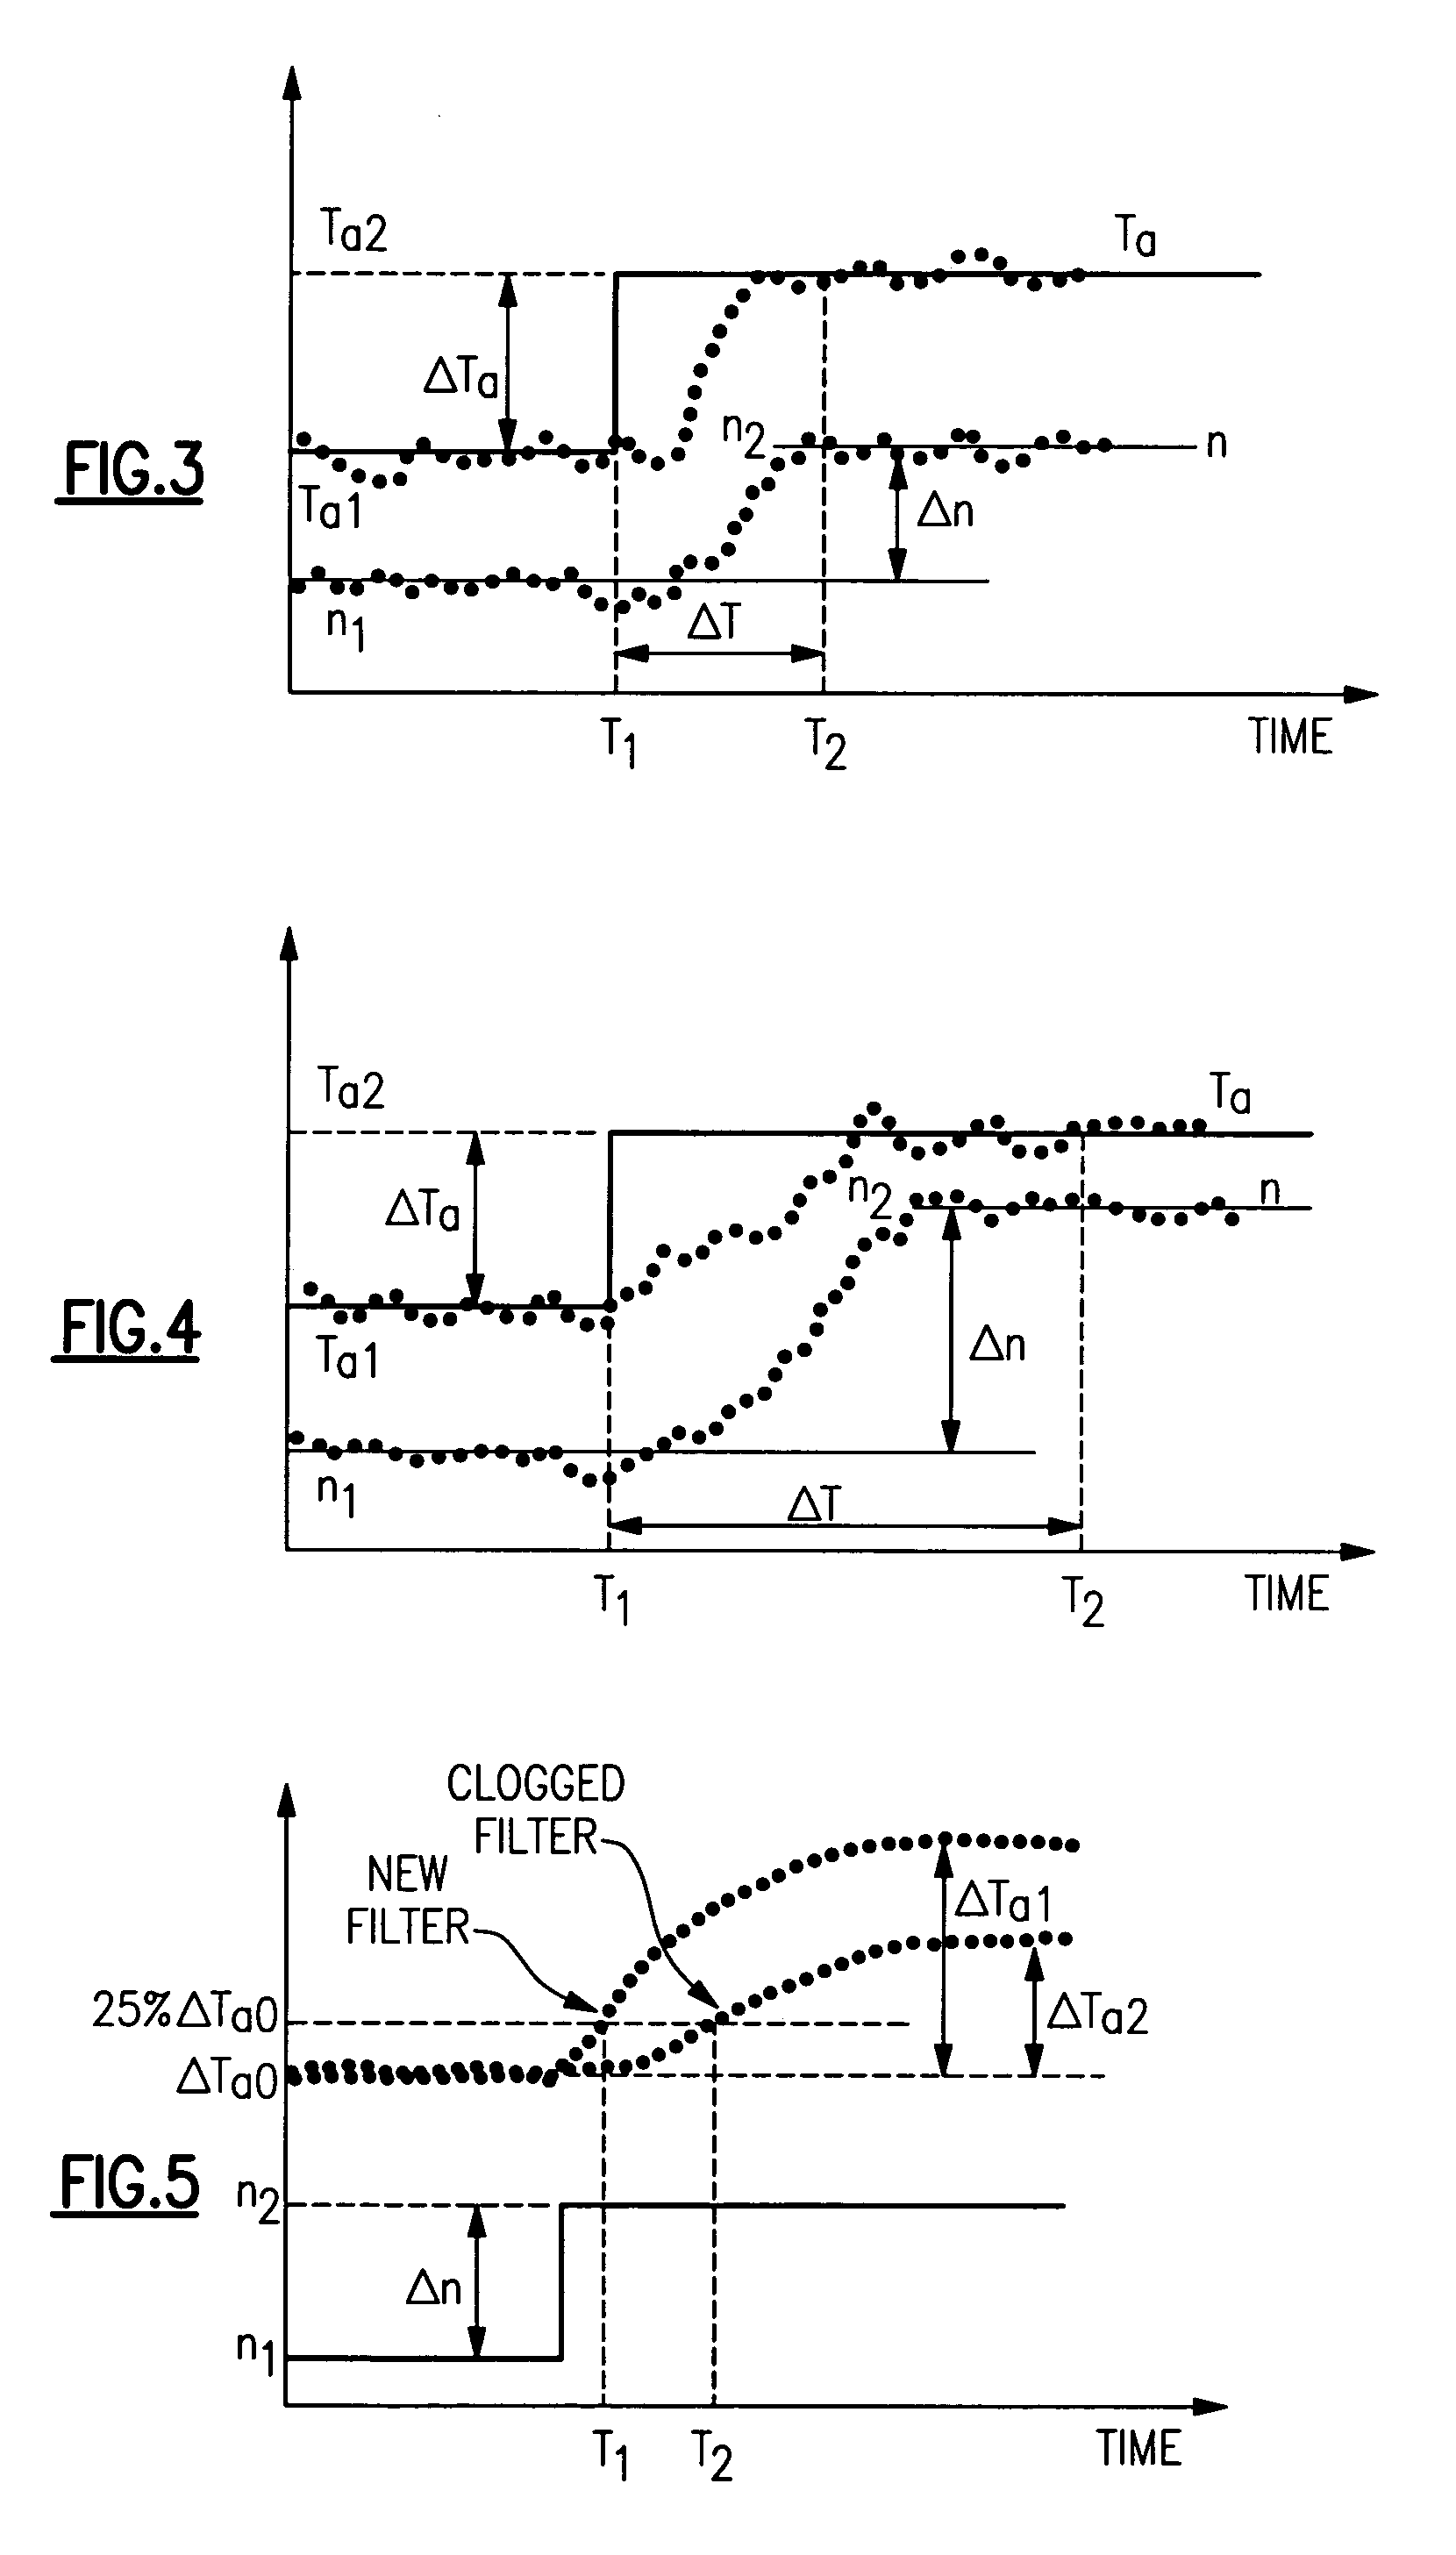 Method and control for testing air filter condition in HVAC system